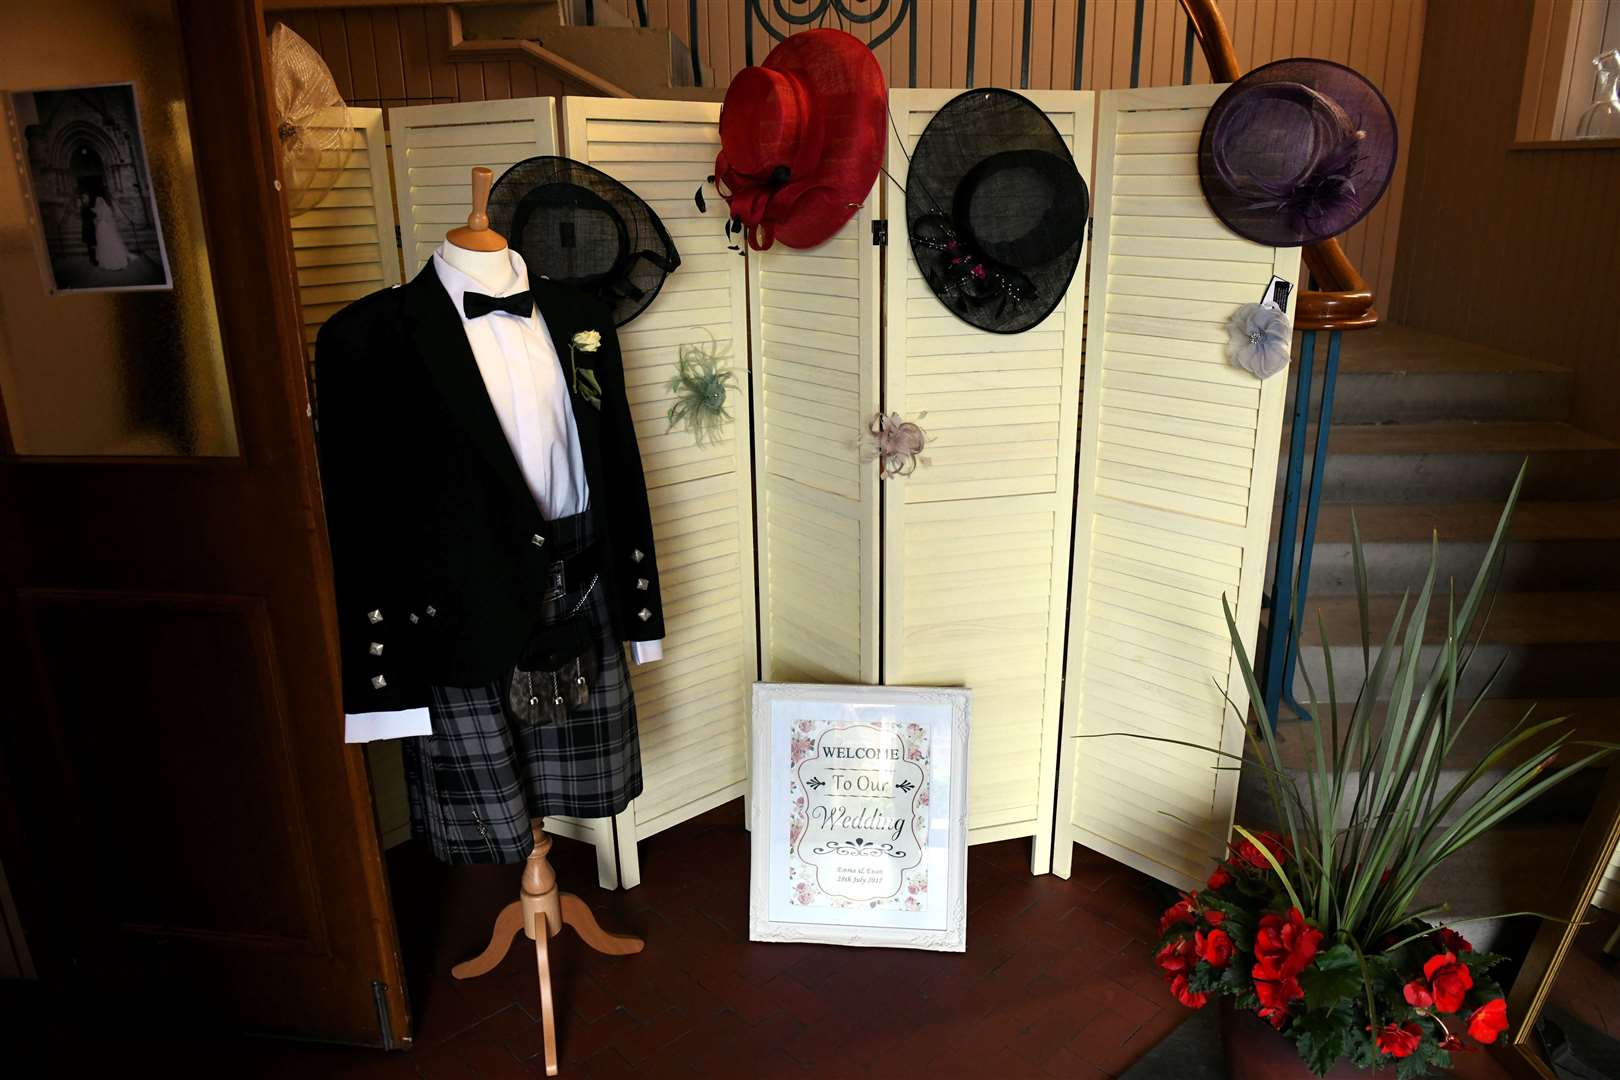 The Wedding Reflections exhibition included outfits and memorabilia.